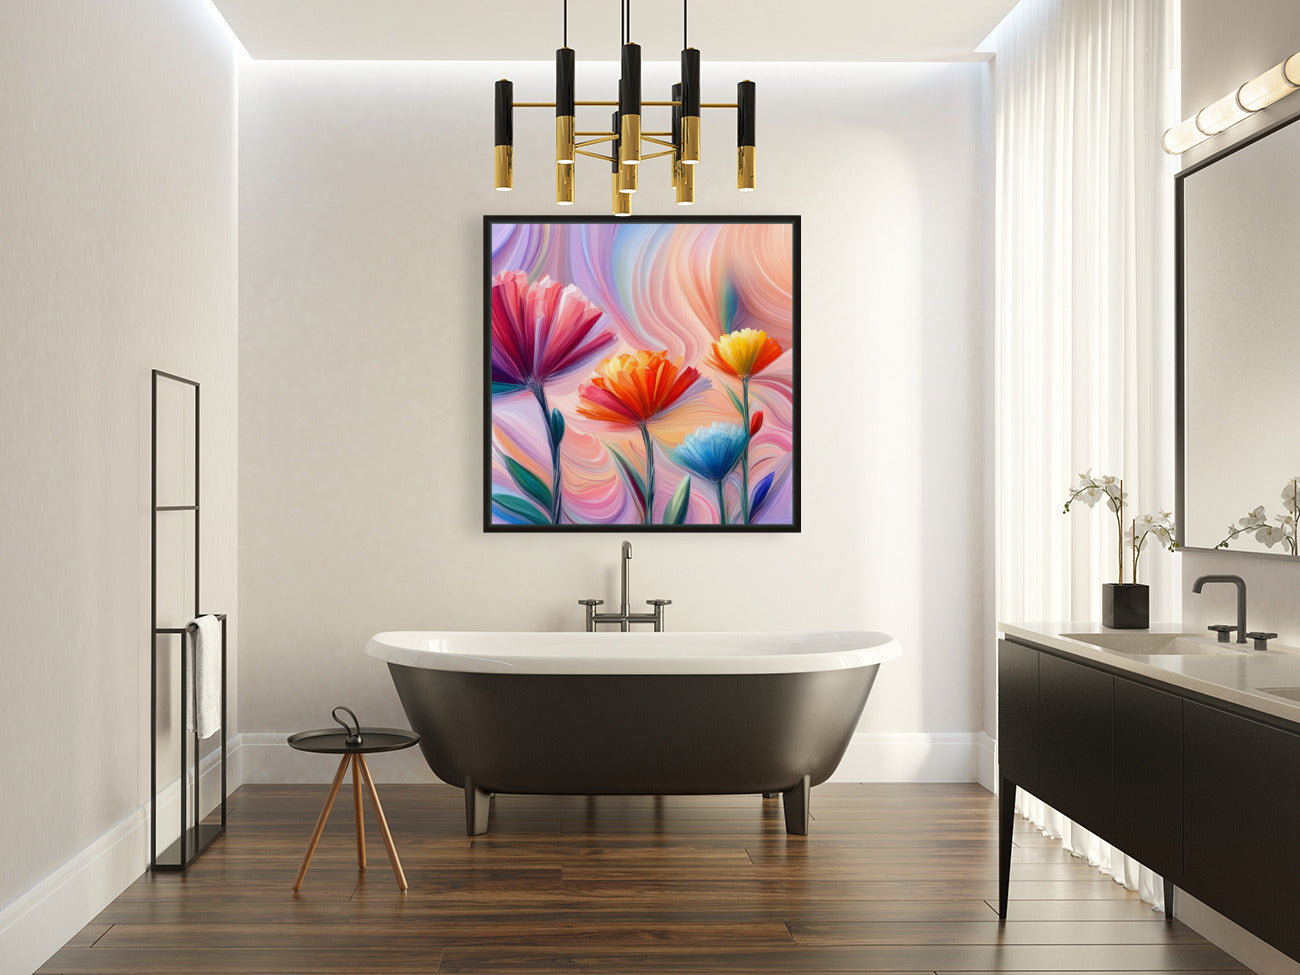 Vibrant pastel colorful wall art, perfect for adding a touch of tranquility to any space.